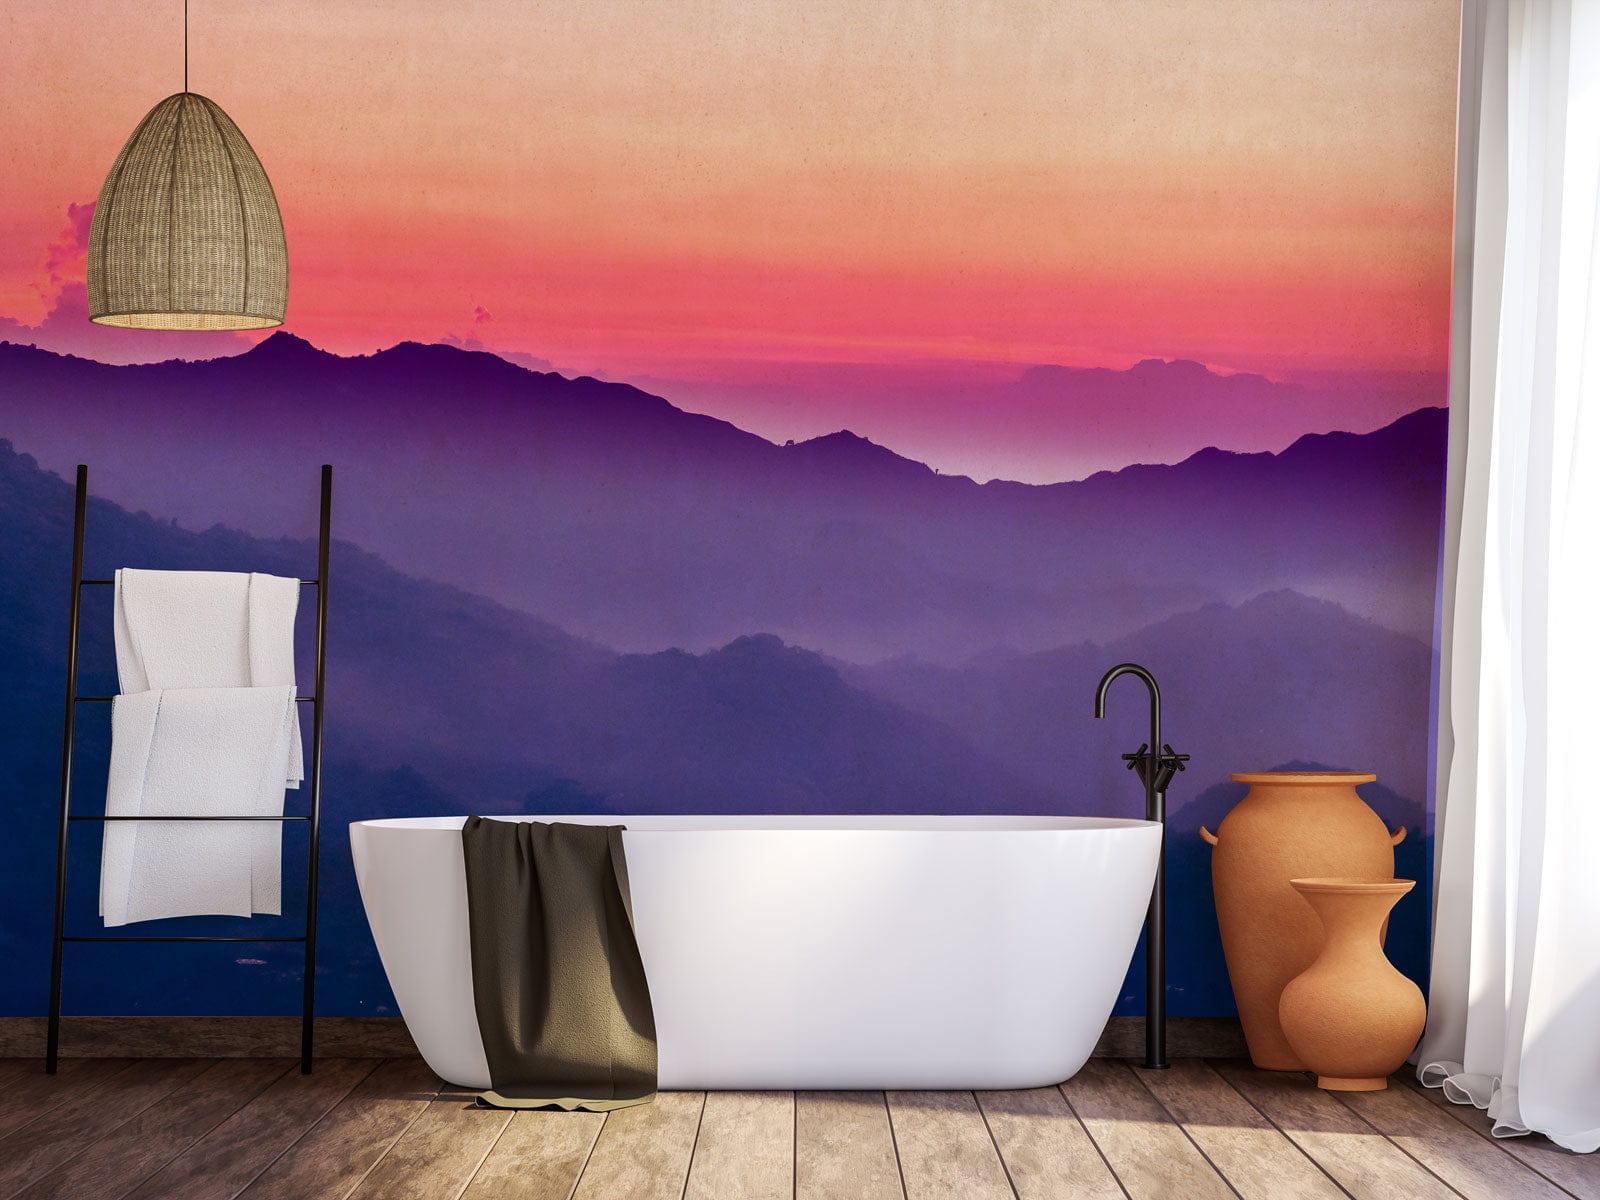 Stunning Purple Mountain Scenery Wallpaper Mural for Use in the Decoration of Bathrooms